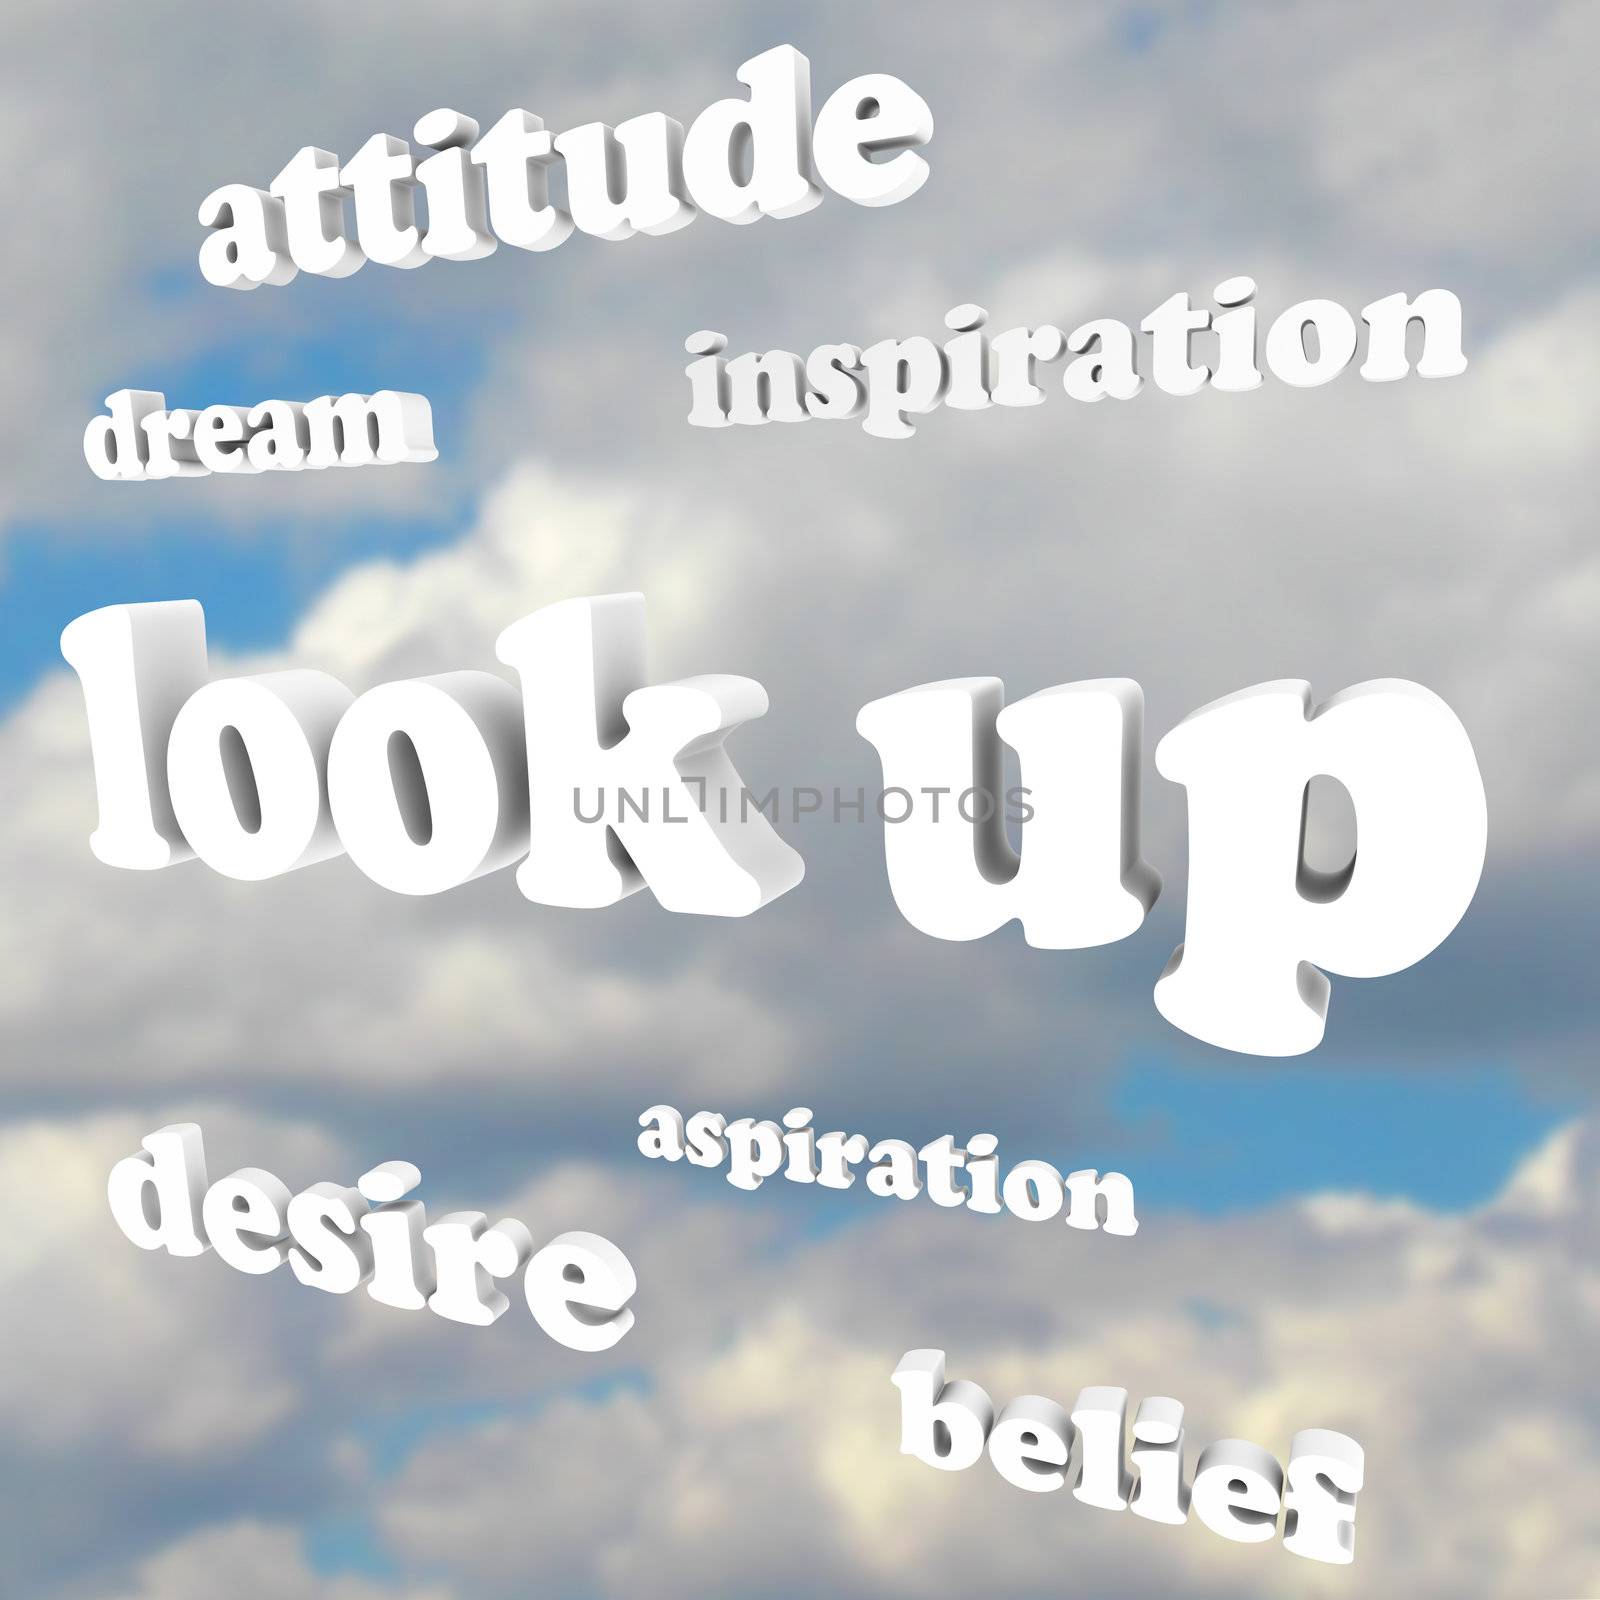 The phrase Look Up and many positive words in 3d letters such as attitude, dream, desire, belief, inspiration, aspiration to illustrate helpful and motivational activity